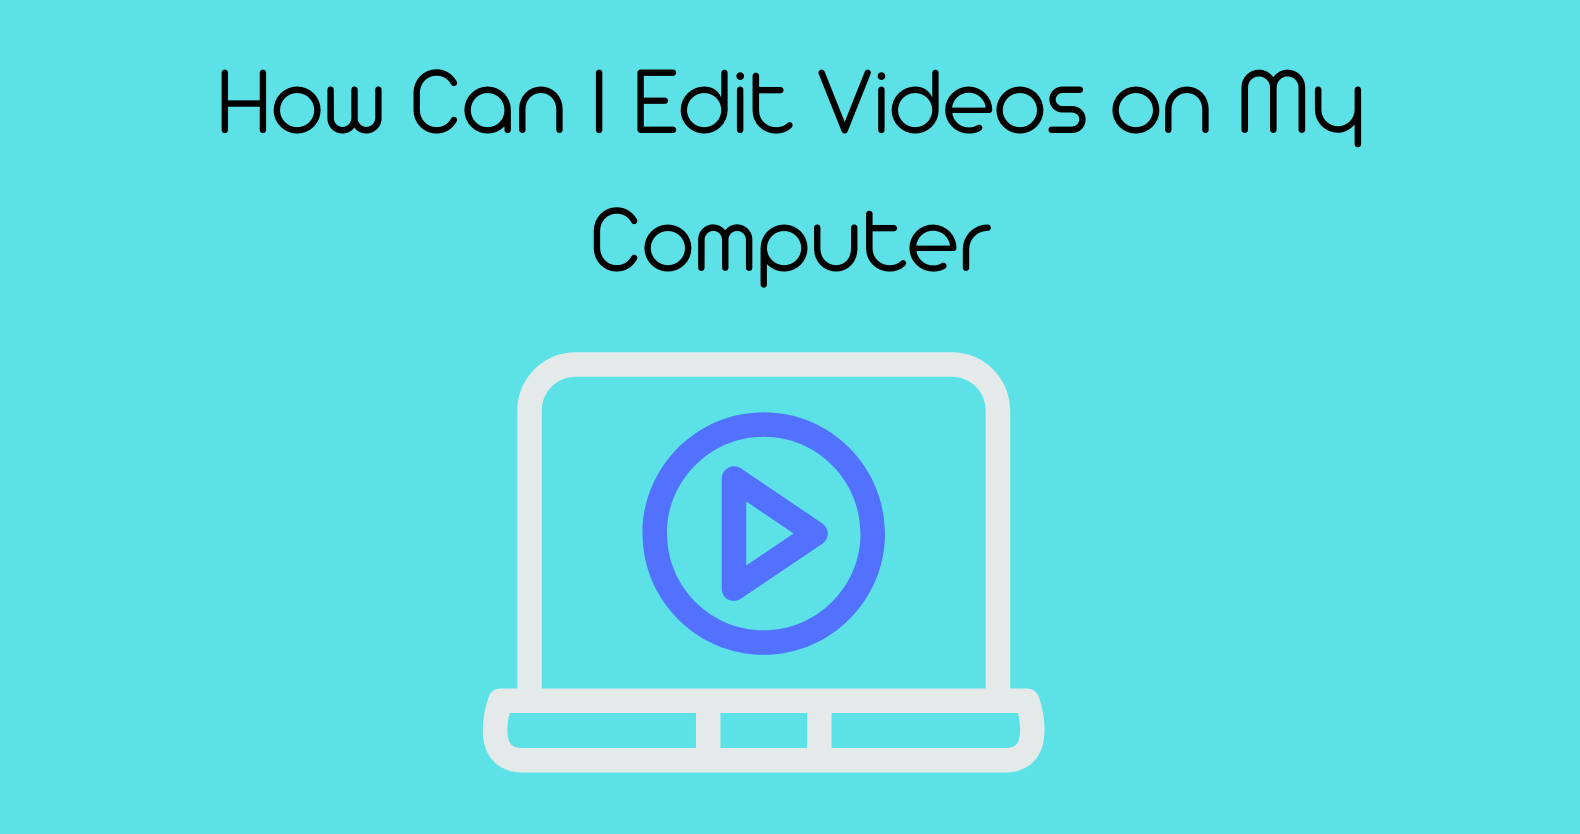 How Can I Edit Videos on My Computer